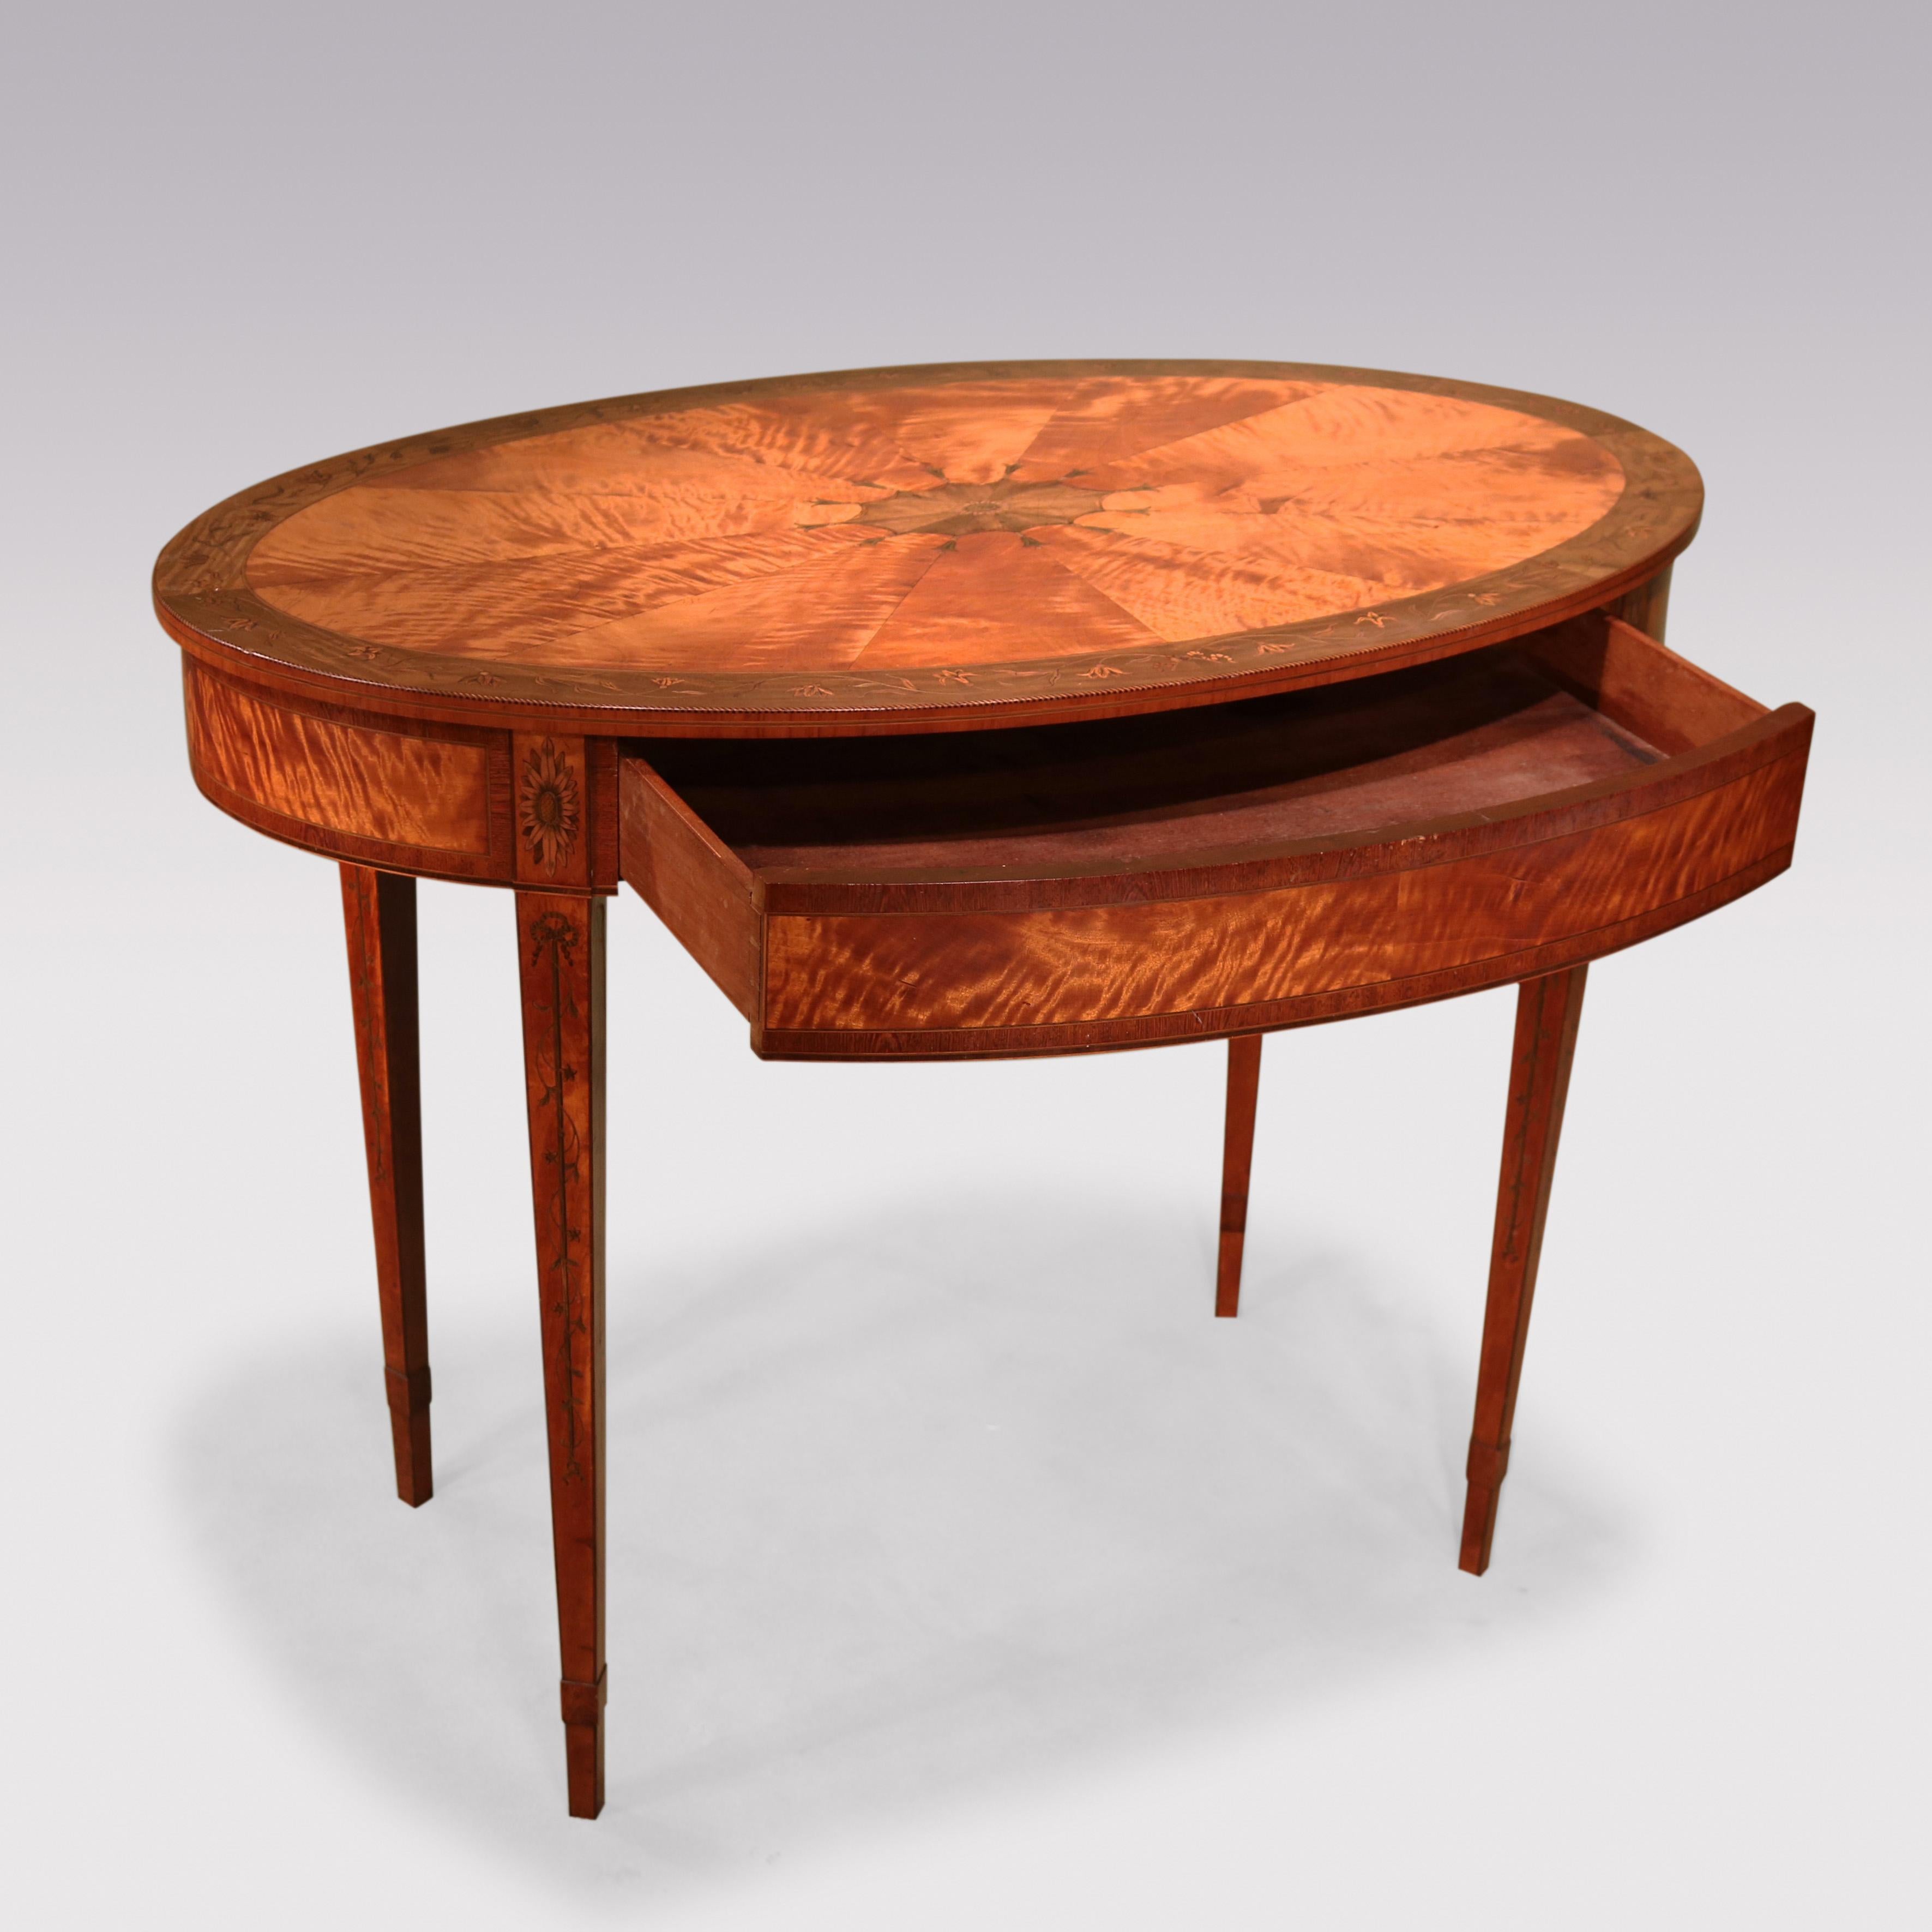 An attractive mid-19th Century satinwood Occasional Table in the 18th Century Sheraton style, having harewood crossbanding & floral inlaid segmented oval top above concealed drawer, supported on leaf scrolled & inlaid square tapering legs with leaf